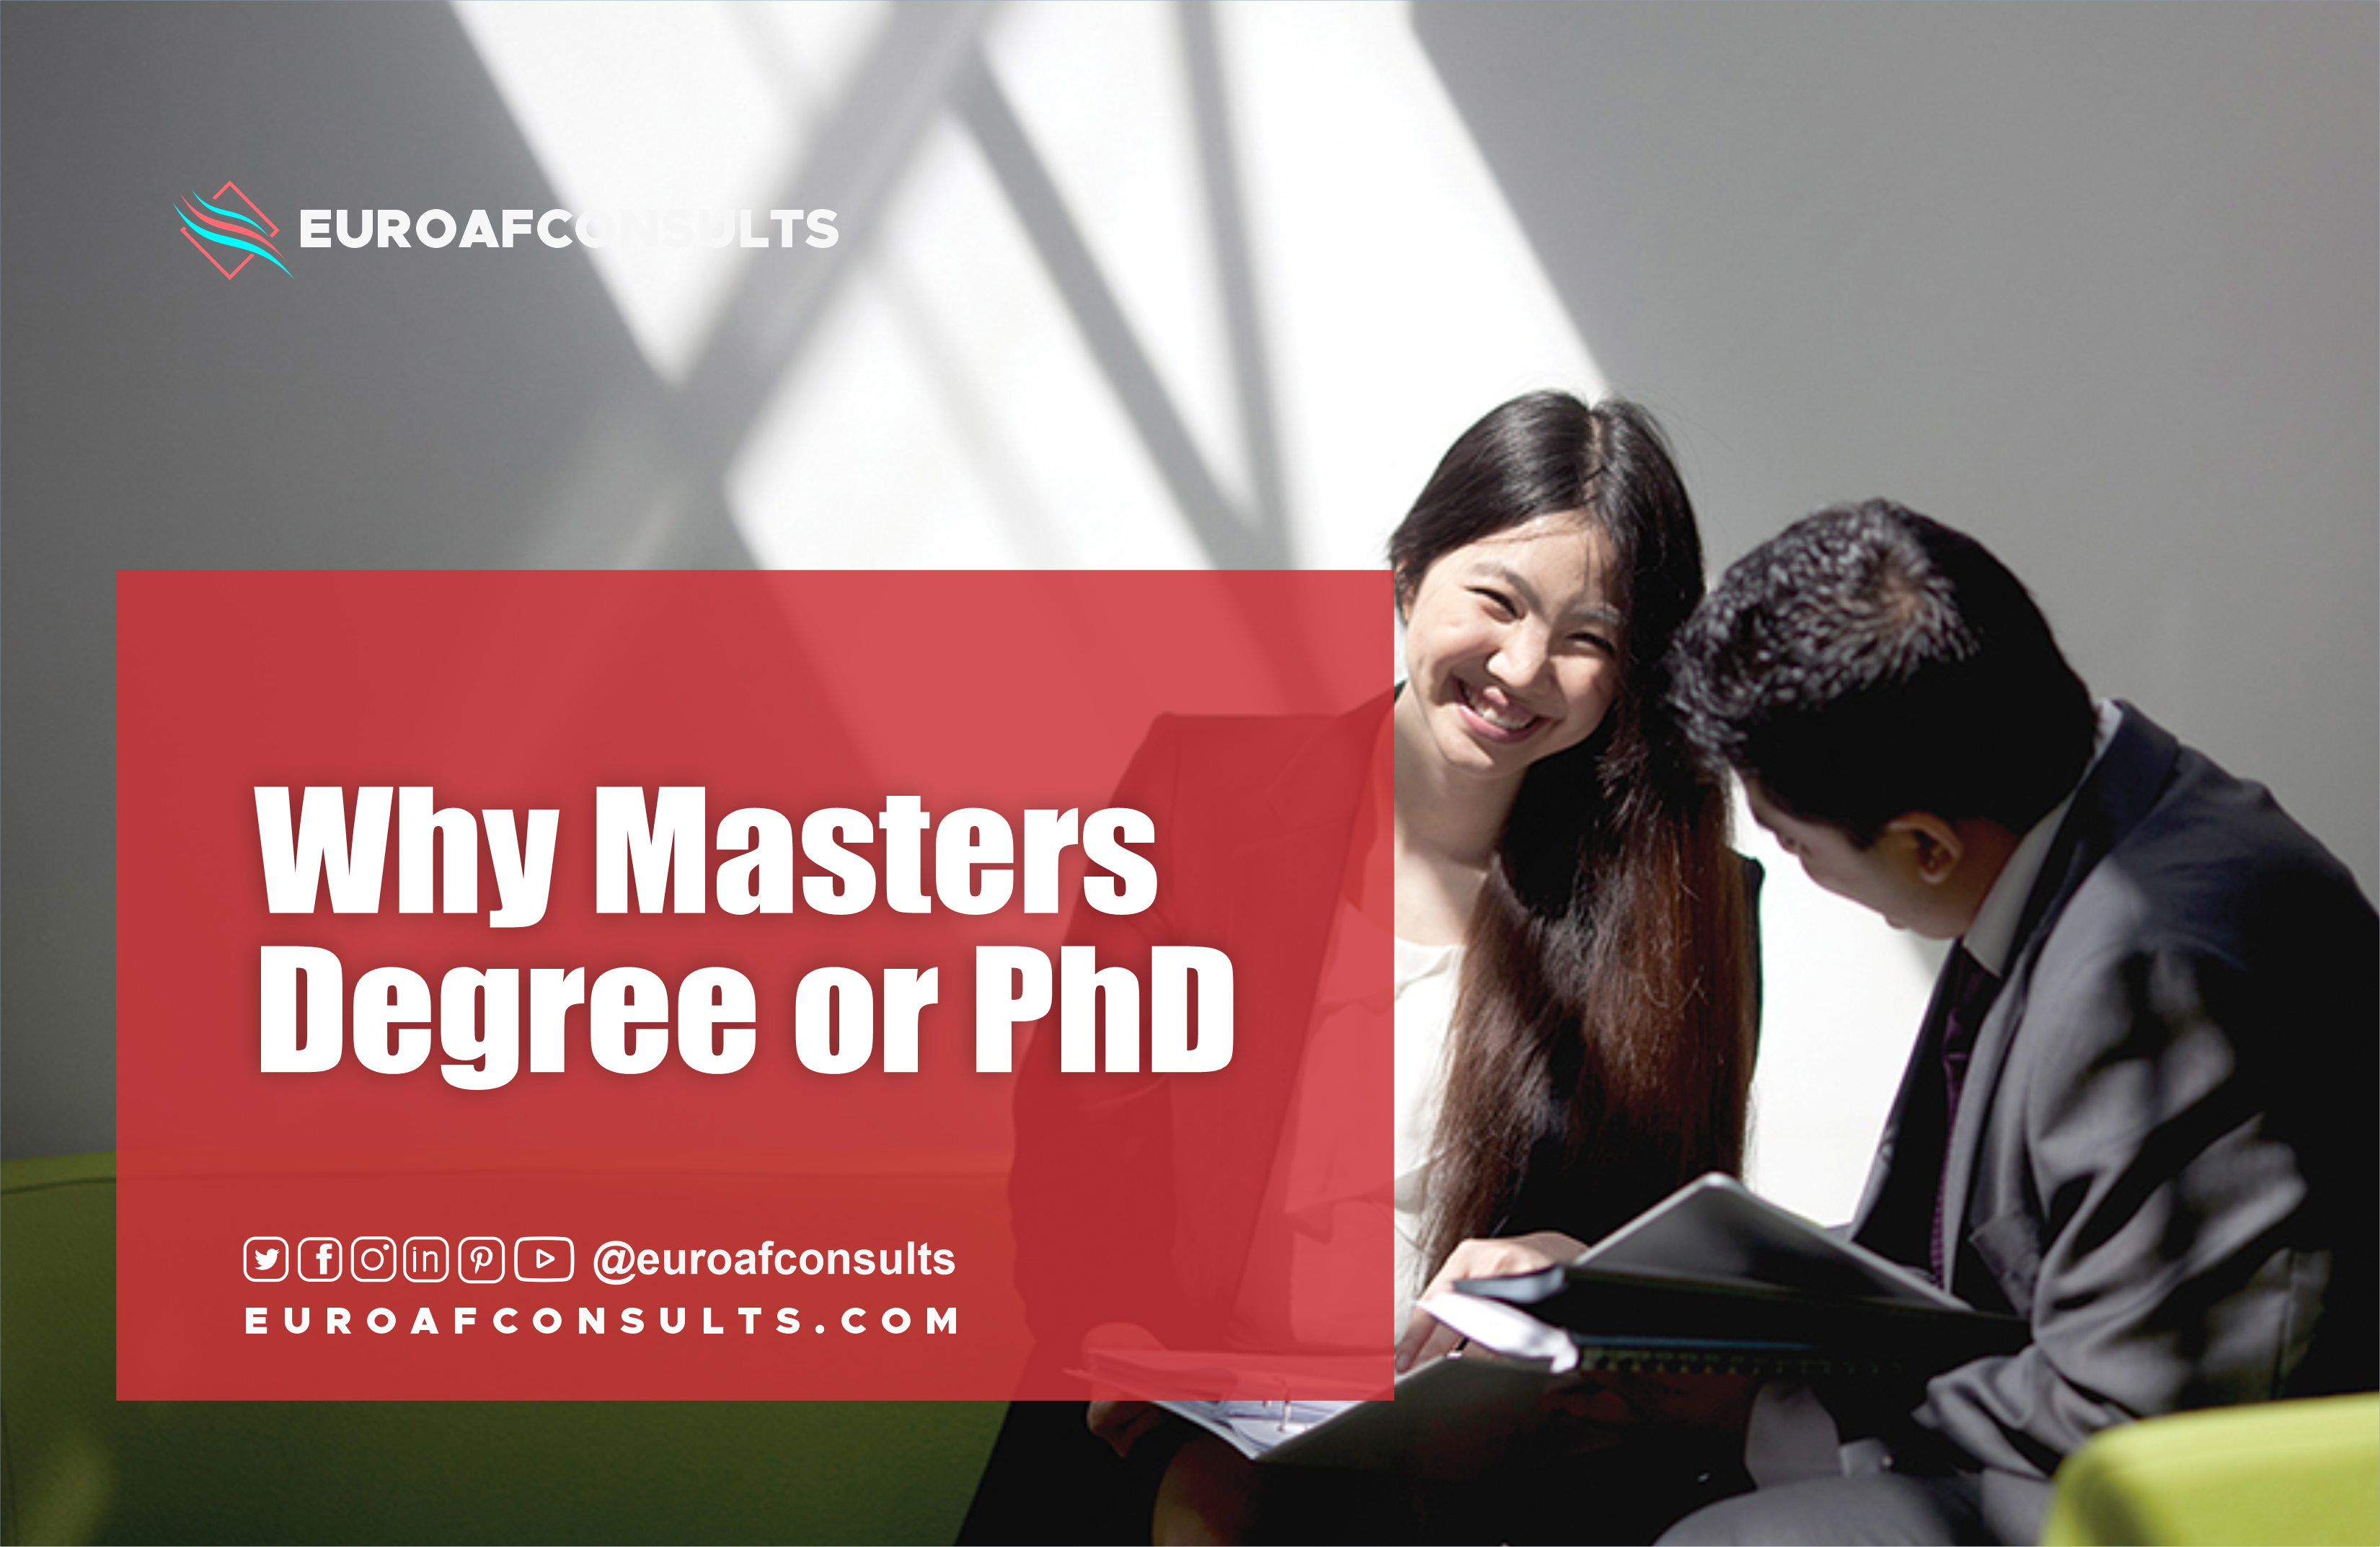 You are currently viewing Why Masters degree or PhD